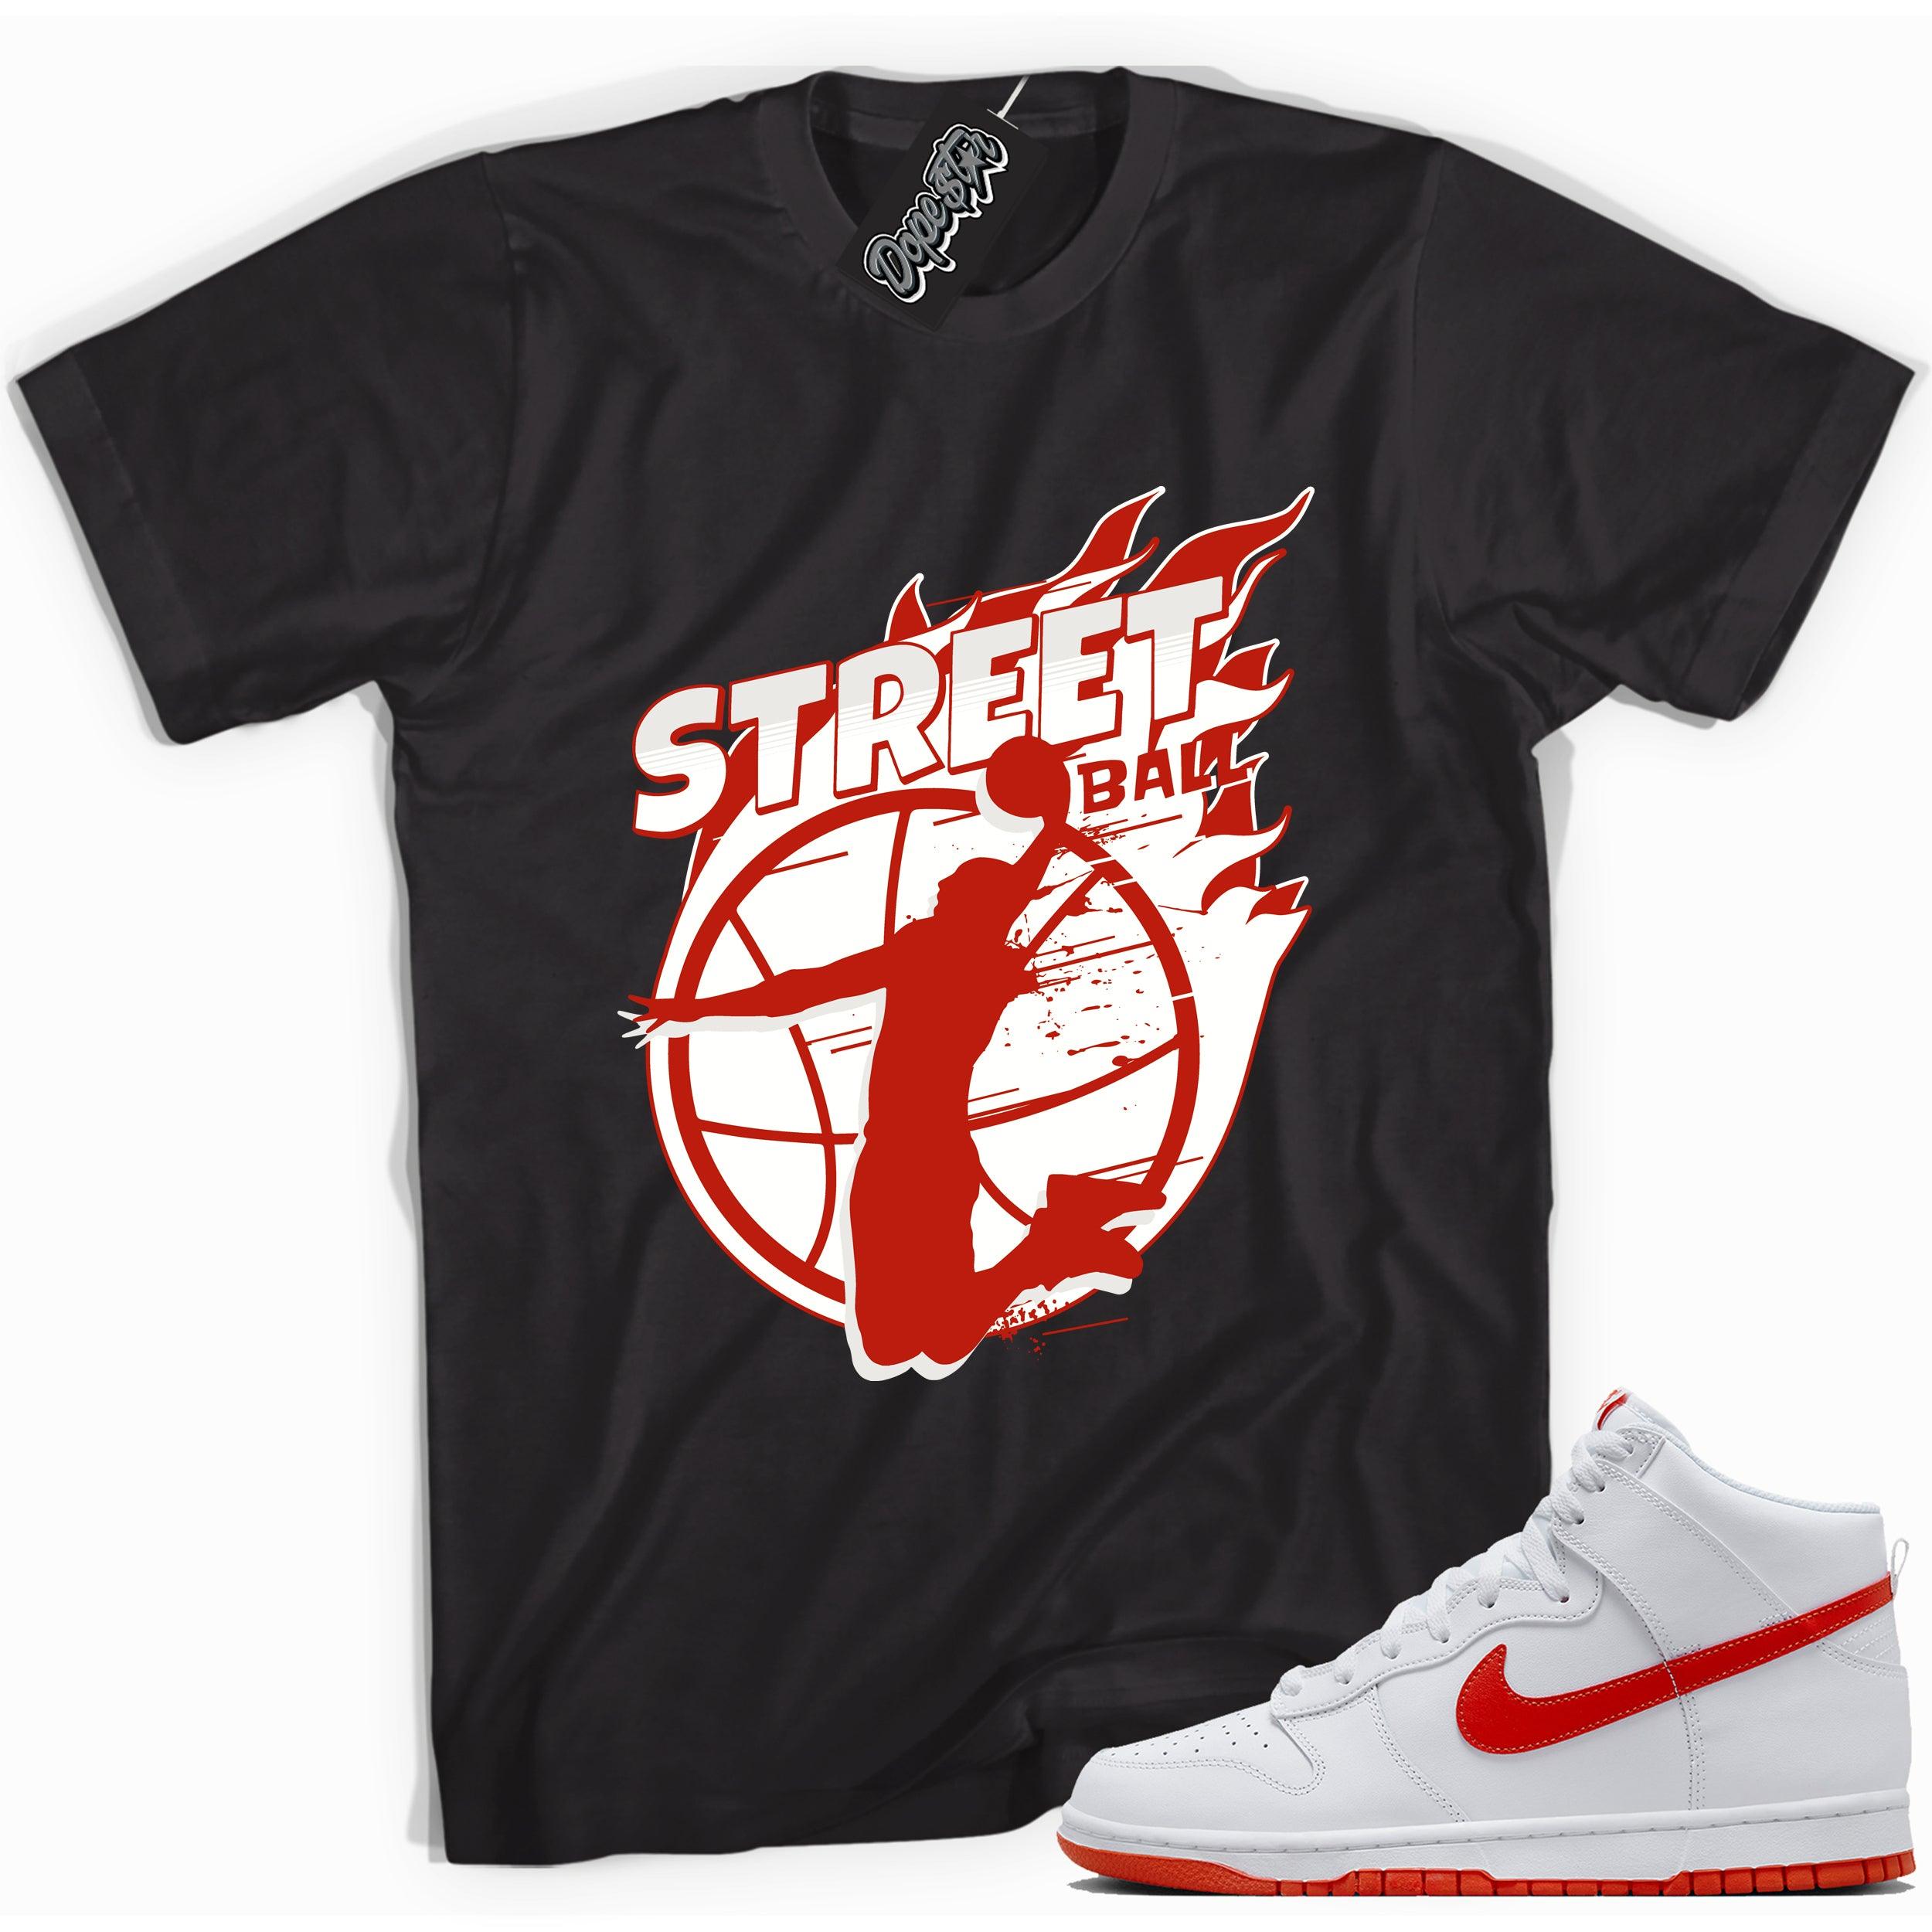 Cool black graphic tee with 'street ball' print, that perfectly matches Nike Dunk High White Picante Red sneakers.